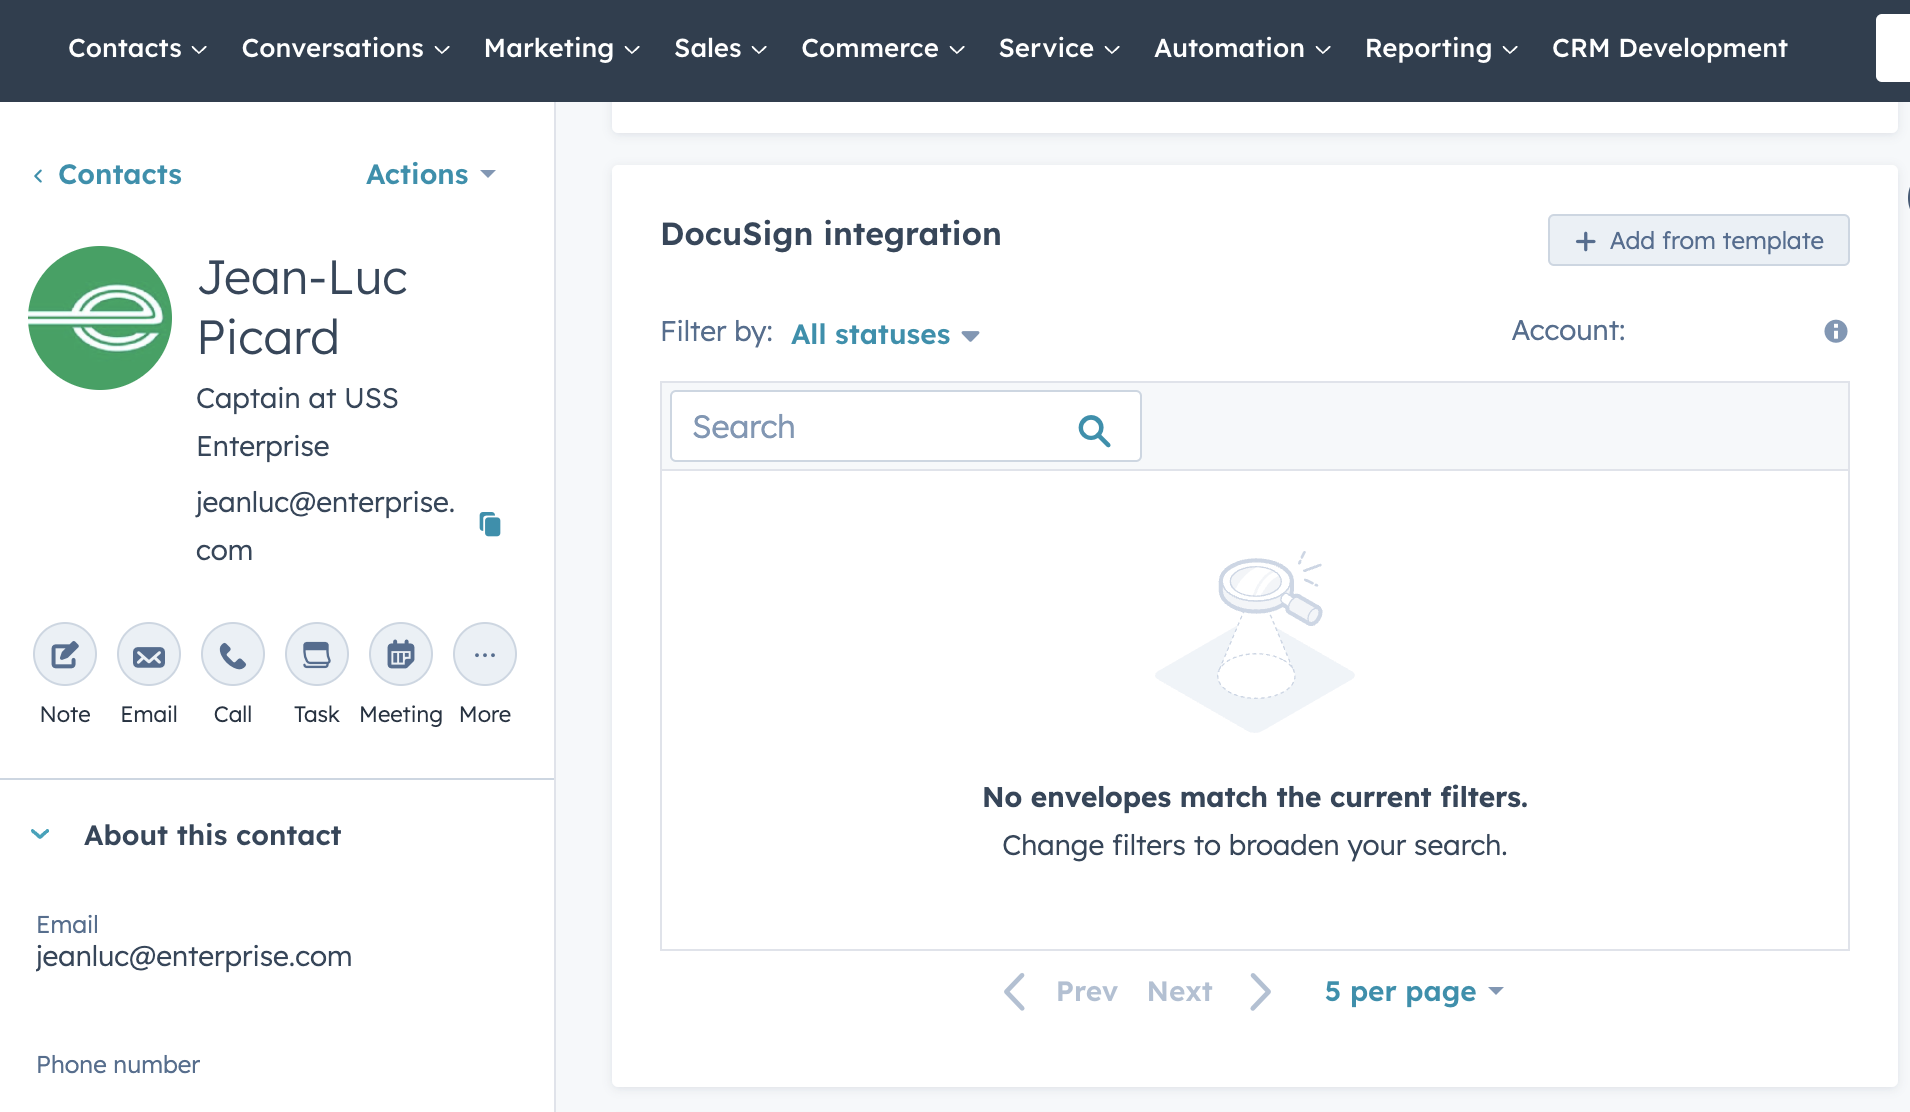 The improved DocuSign integration with HubSpot